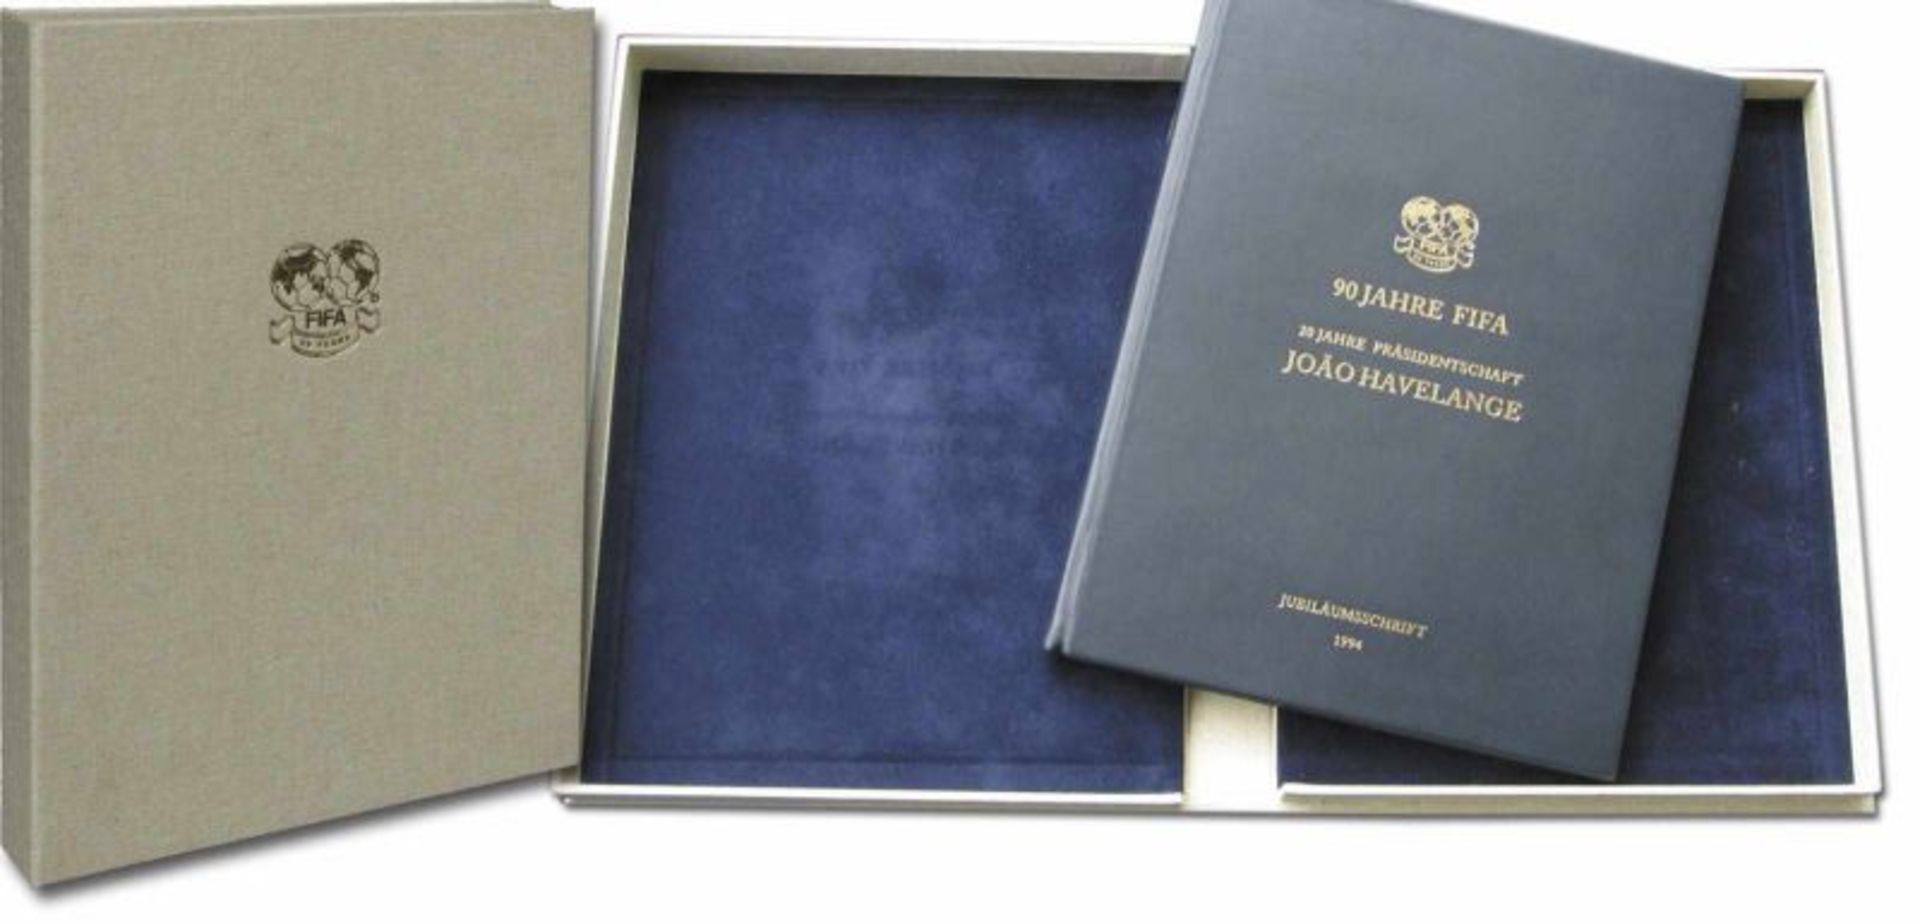 90 Years FIFA & 20 Years Presidency of Joao Havel - Official Commemorative book with short history